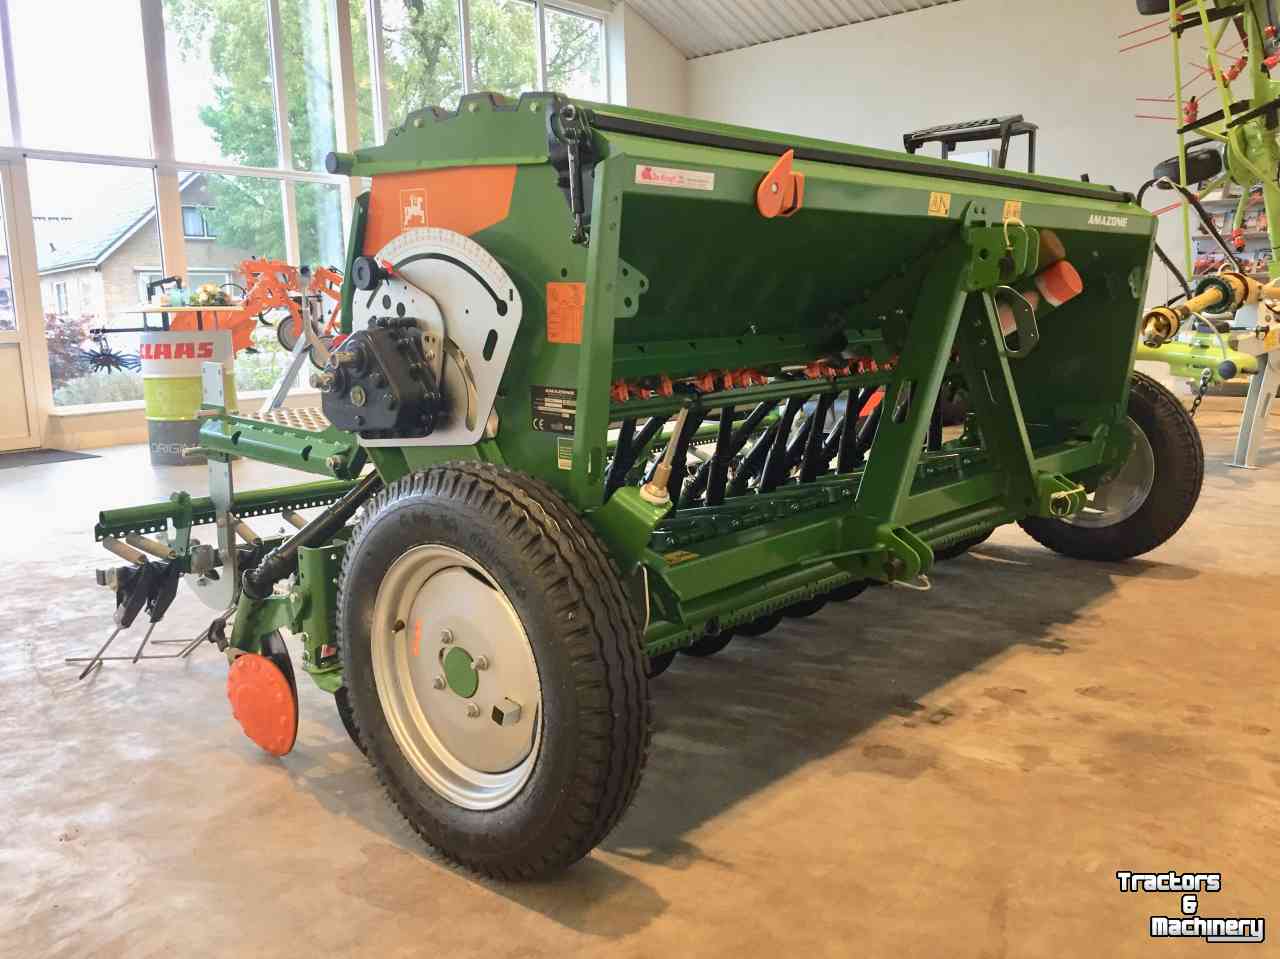 Seed drill Amazone D9-3000 special